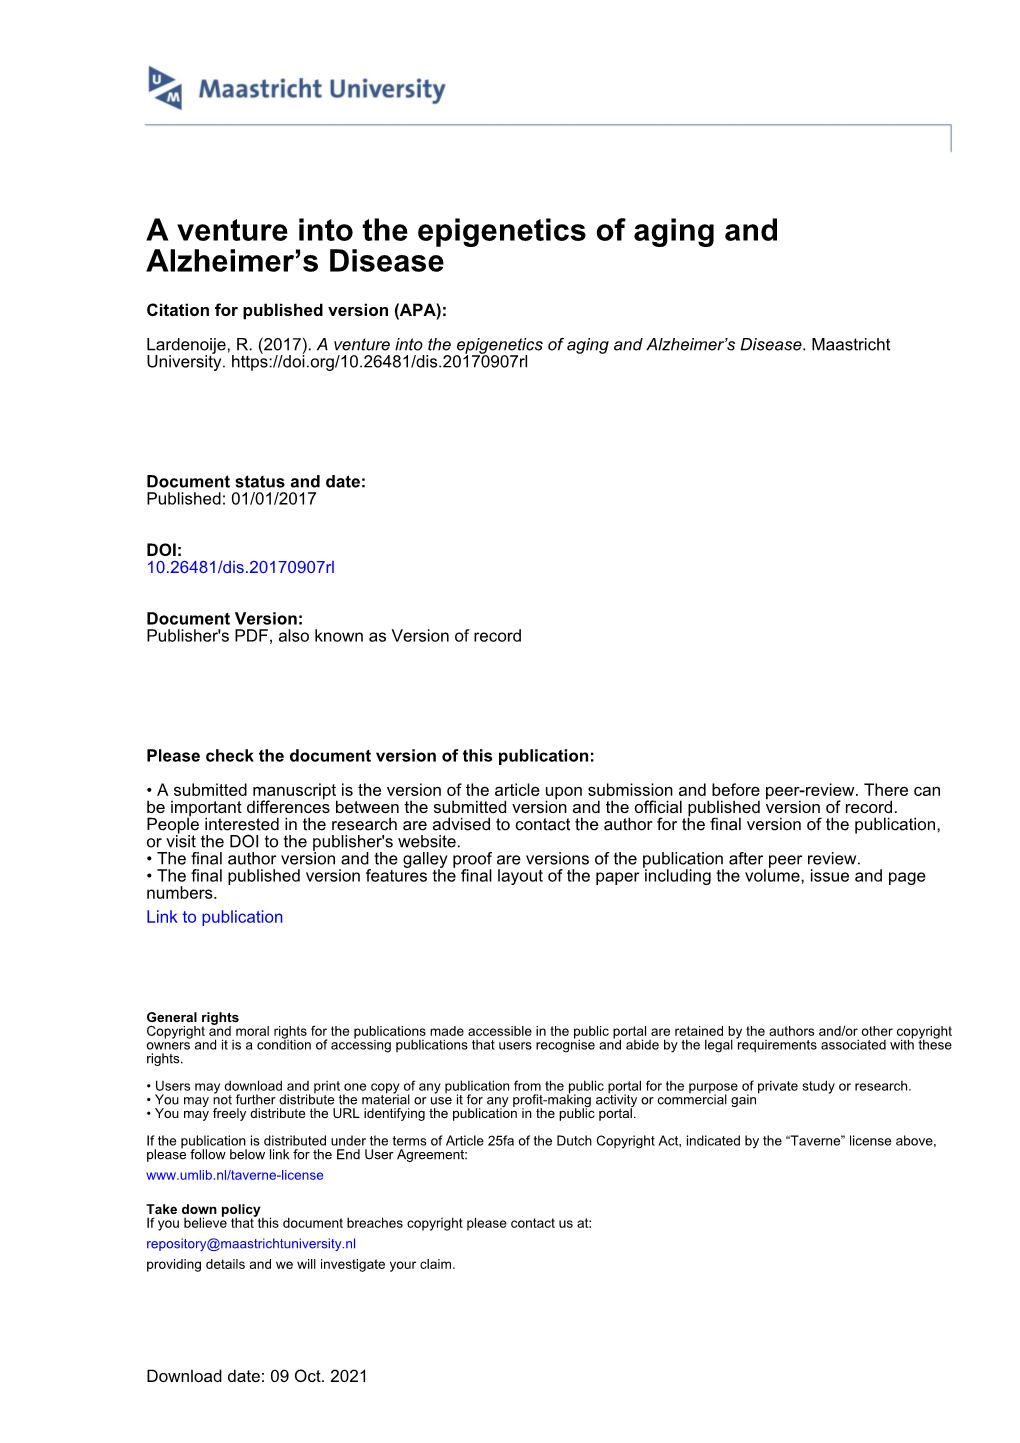 A Venture Into the Epigenetics of Aging and Alzheimer's Disease